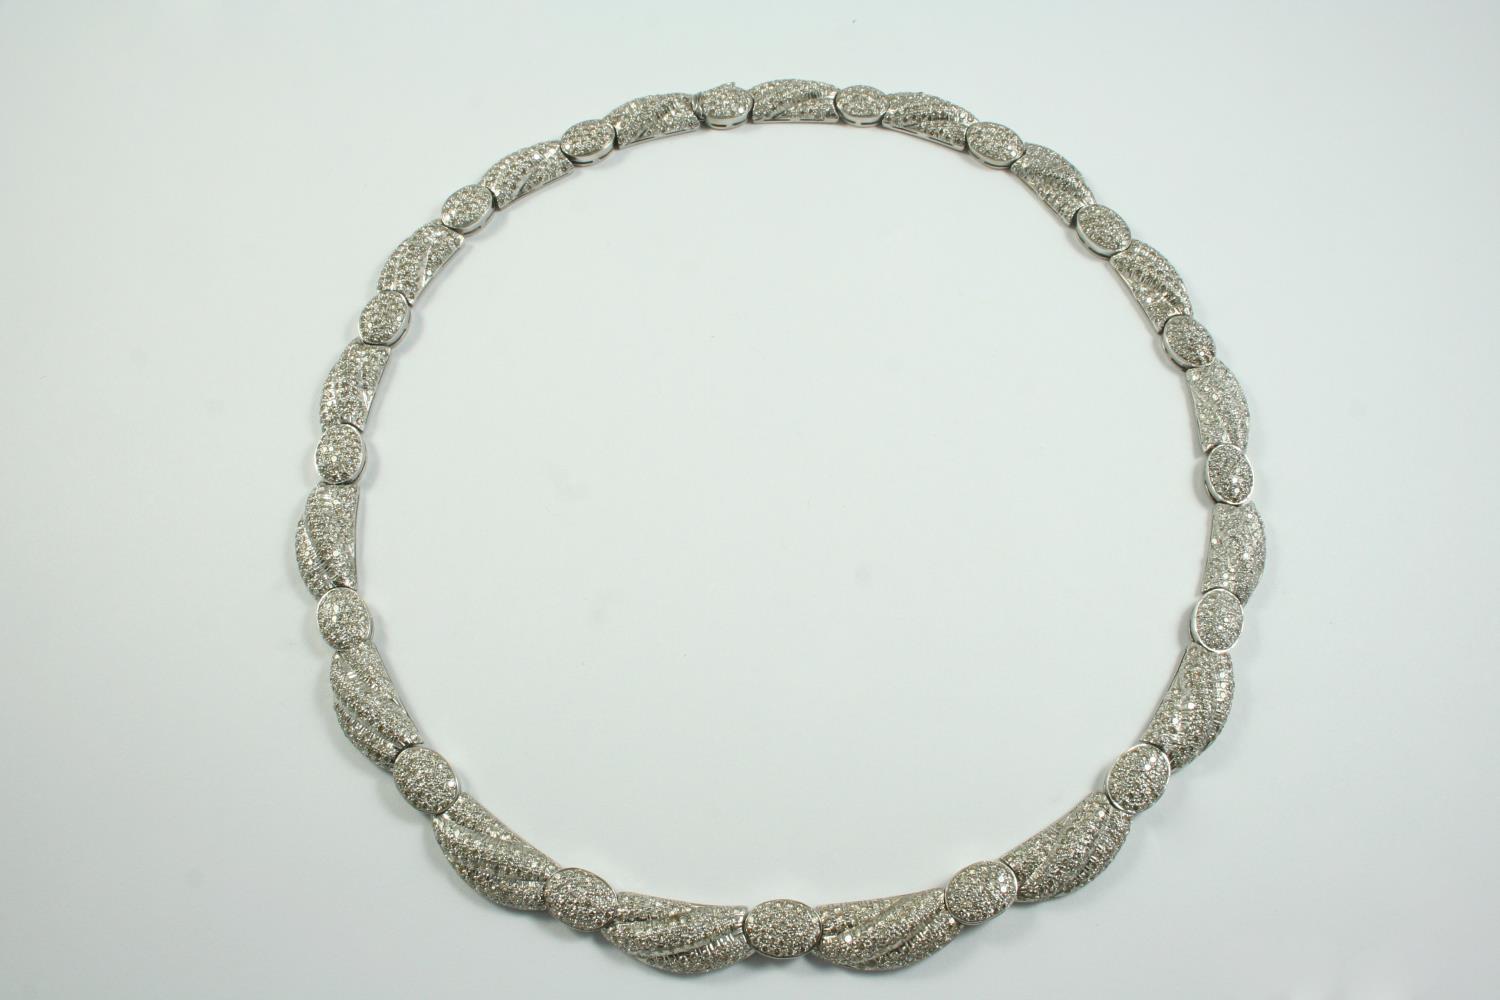 A DIAMOND COLLAR NECKLACE set overall with circular-cut diamonds, in 18ct white gold, long